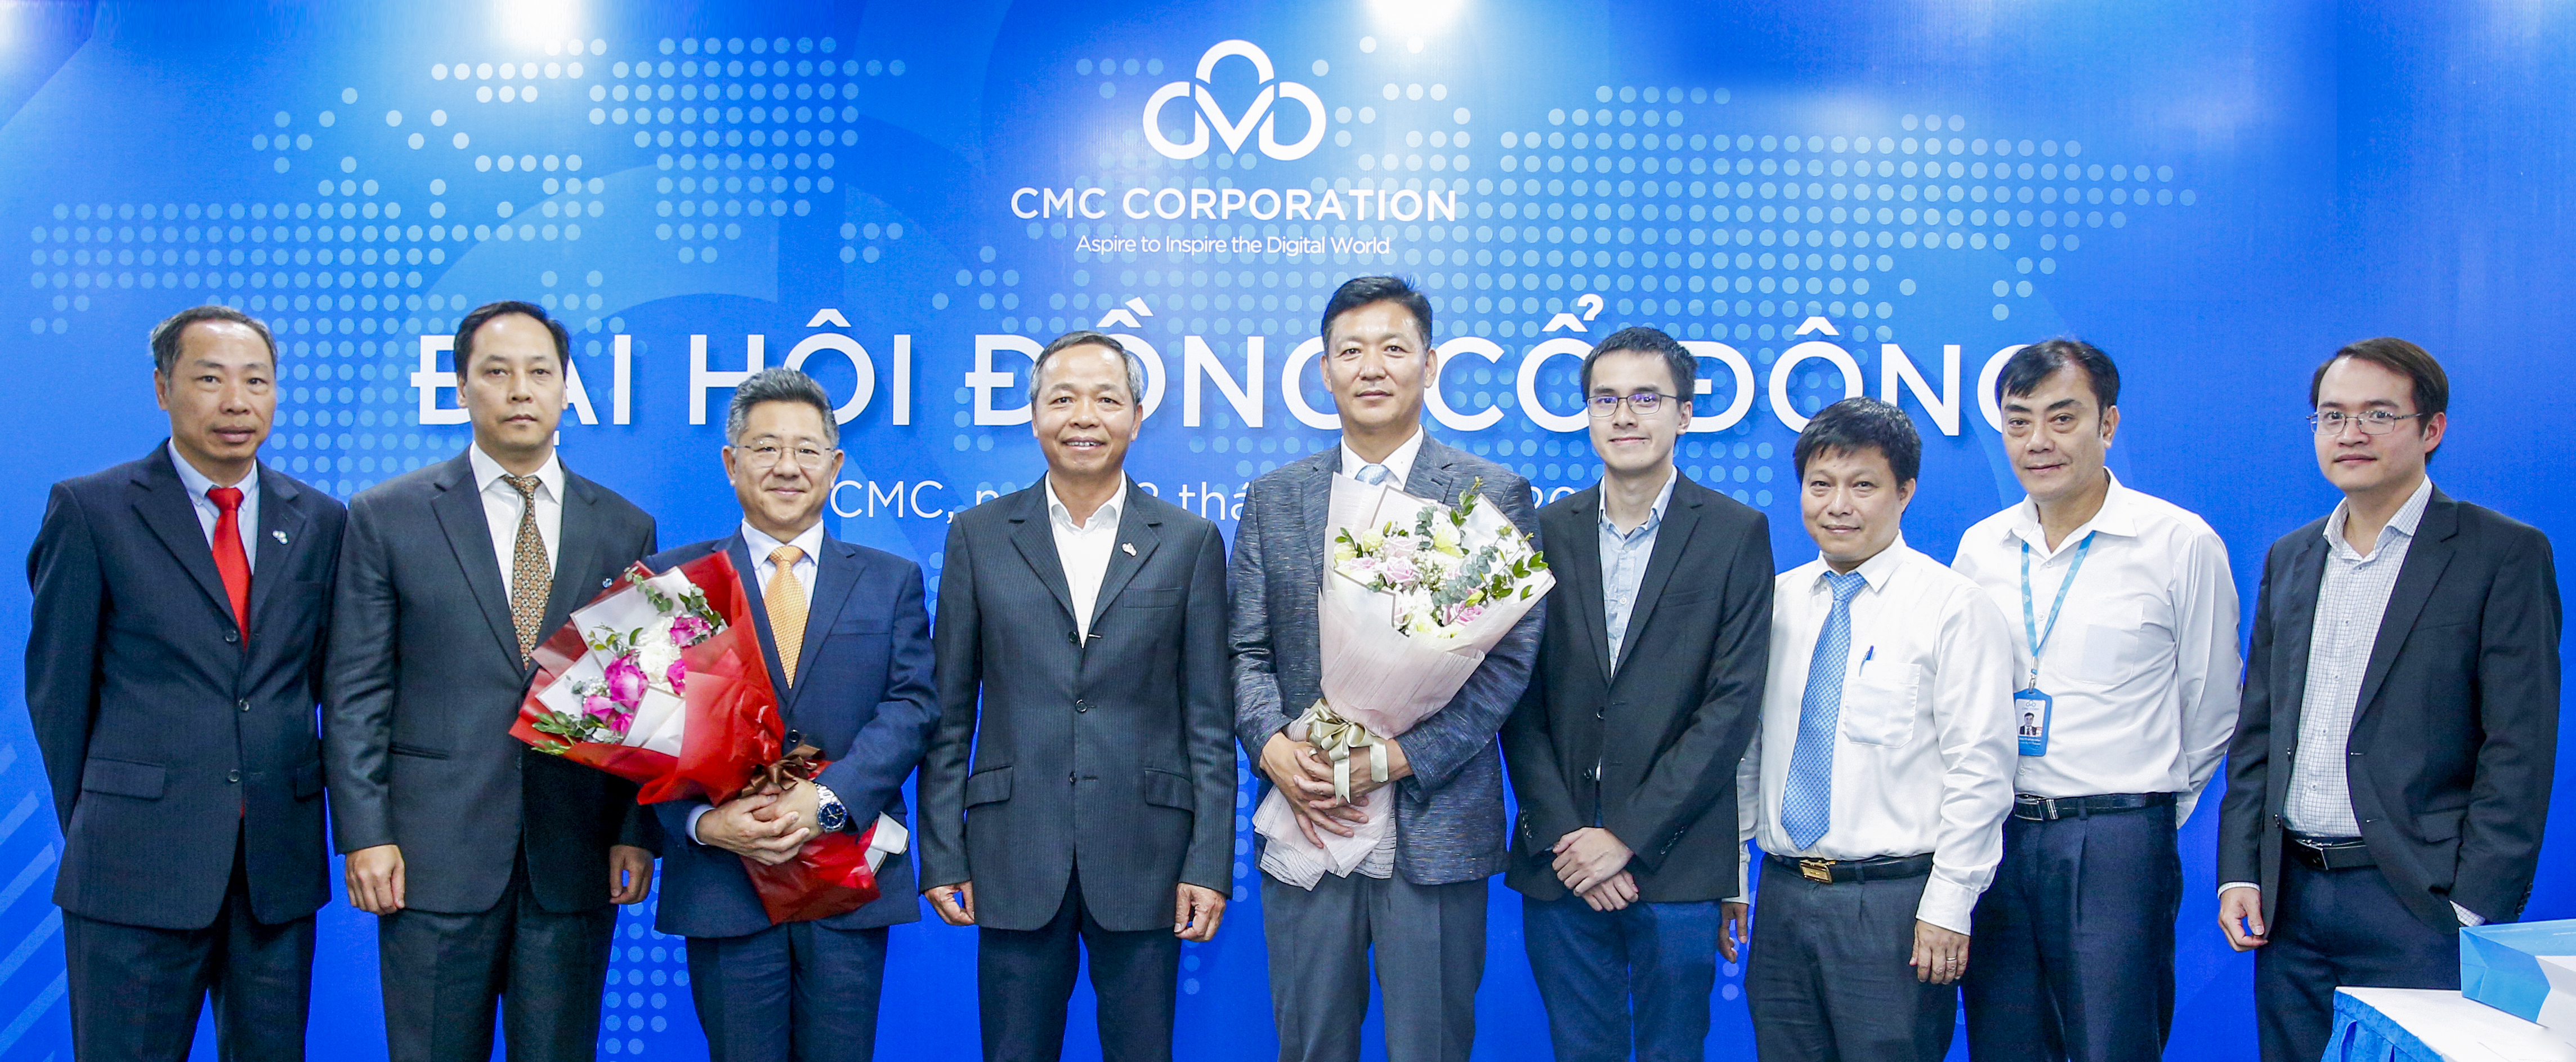 CMC holds extraordinary general meeting, changing members of Board of Directors